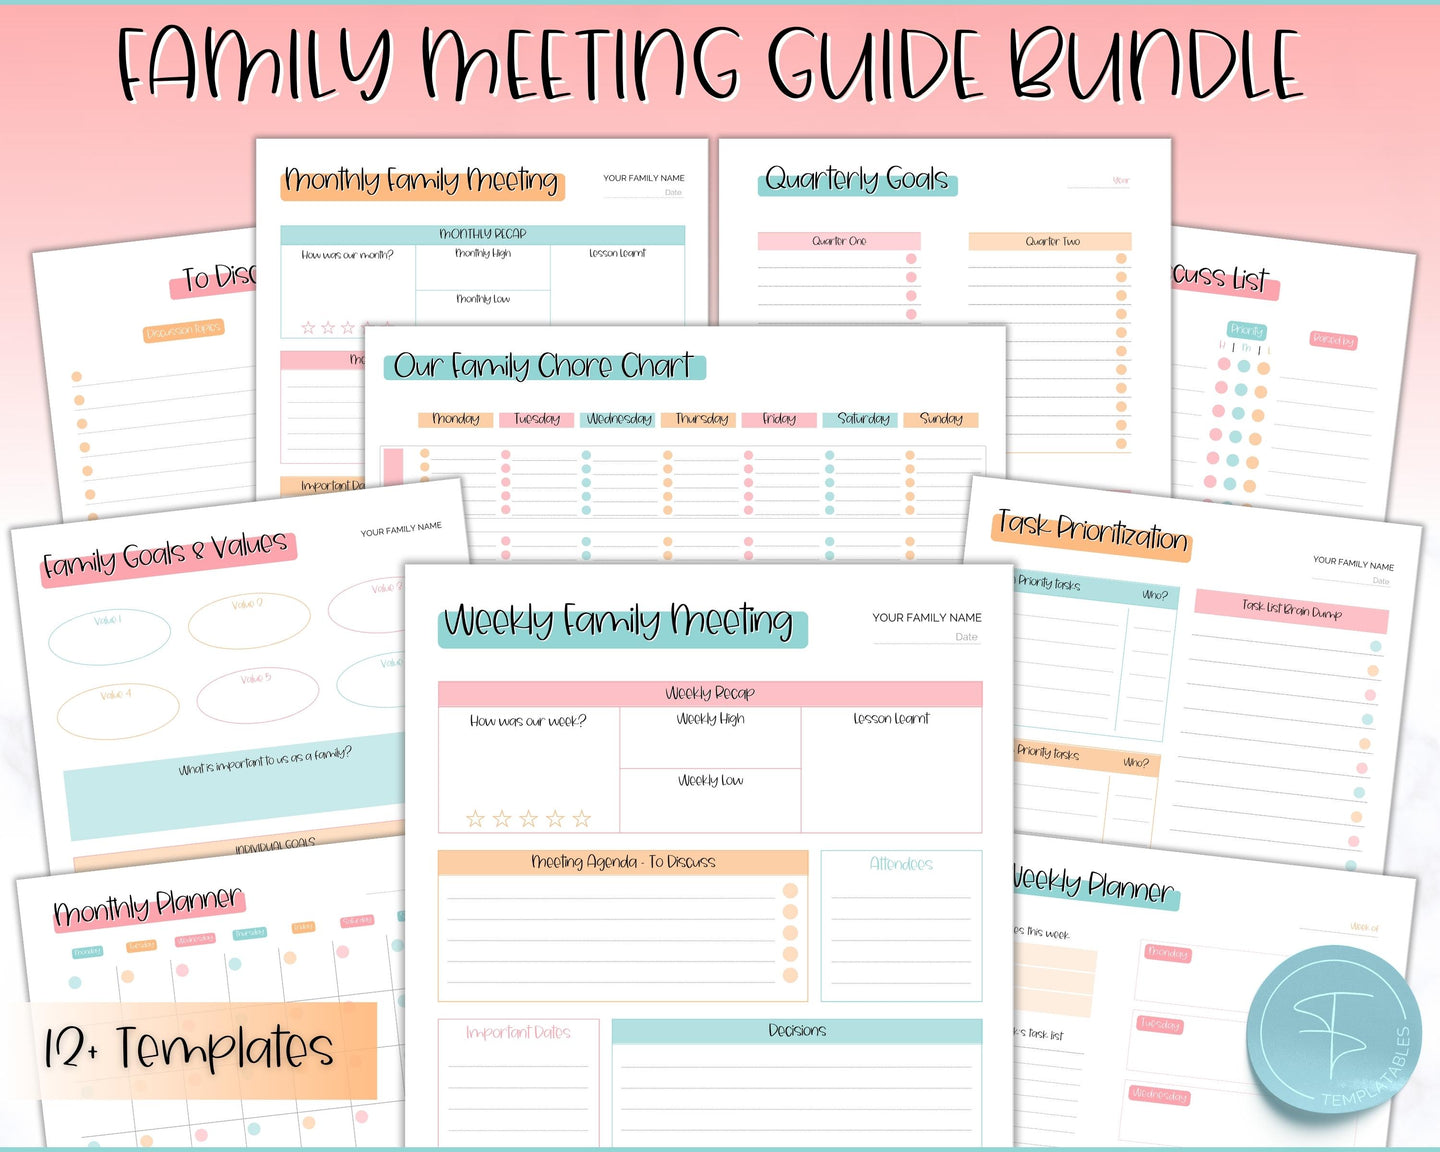 Family Meeting Guide - 12pg Printable Bundle with Meeting Agenda | Family Calendar, Household Planner & Home Organization | Colorful Sky